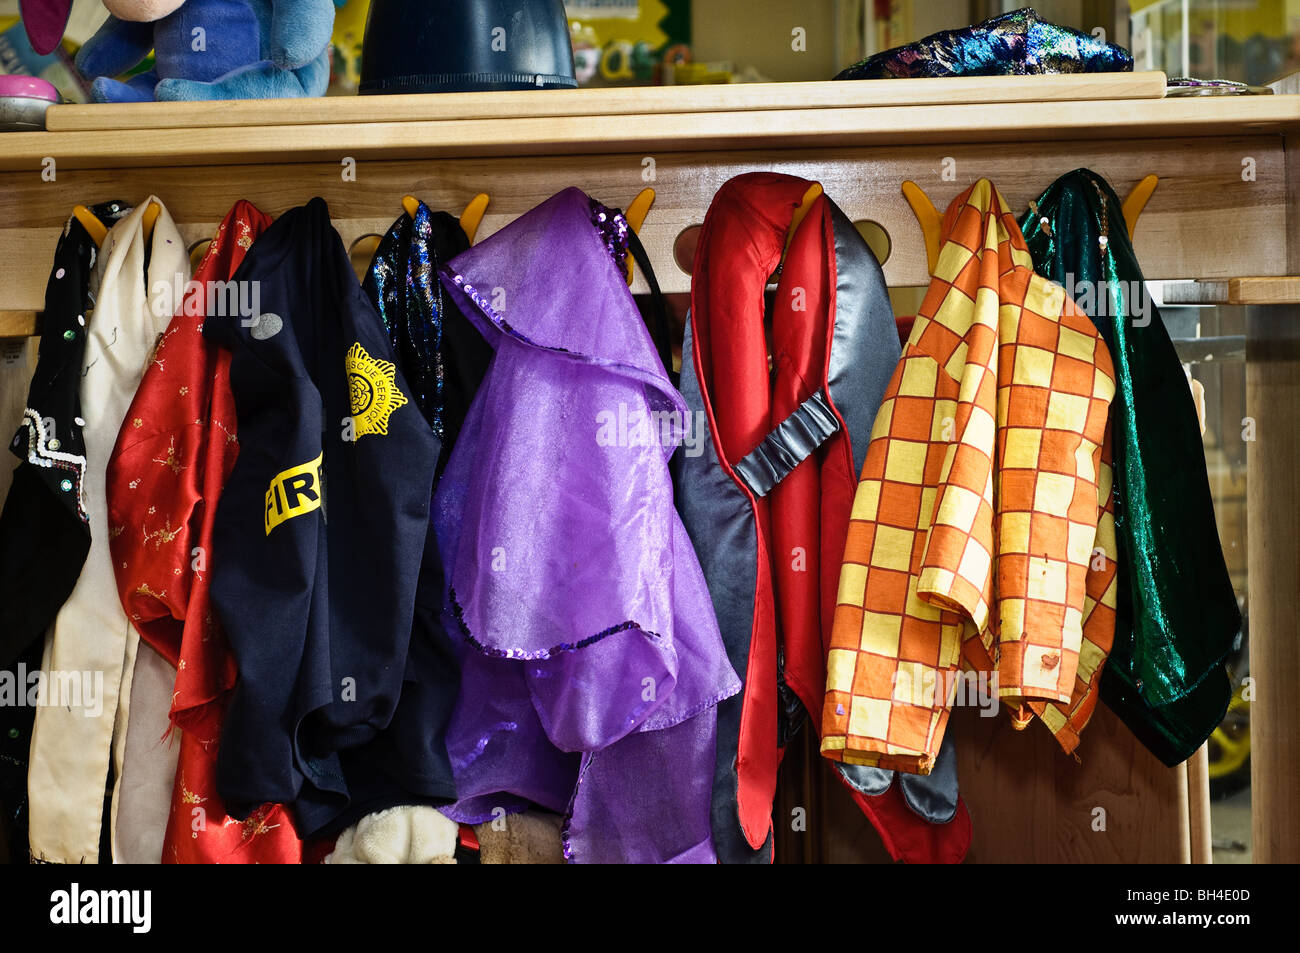 Coats hanging up at a nursery. Stock Photo